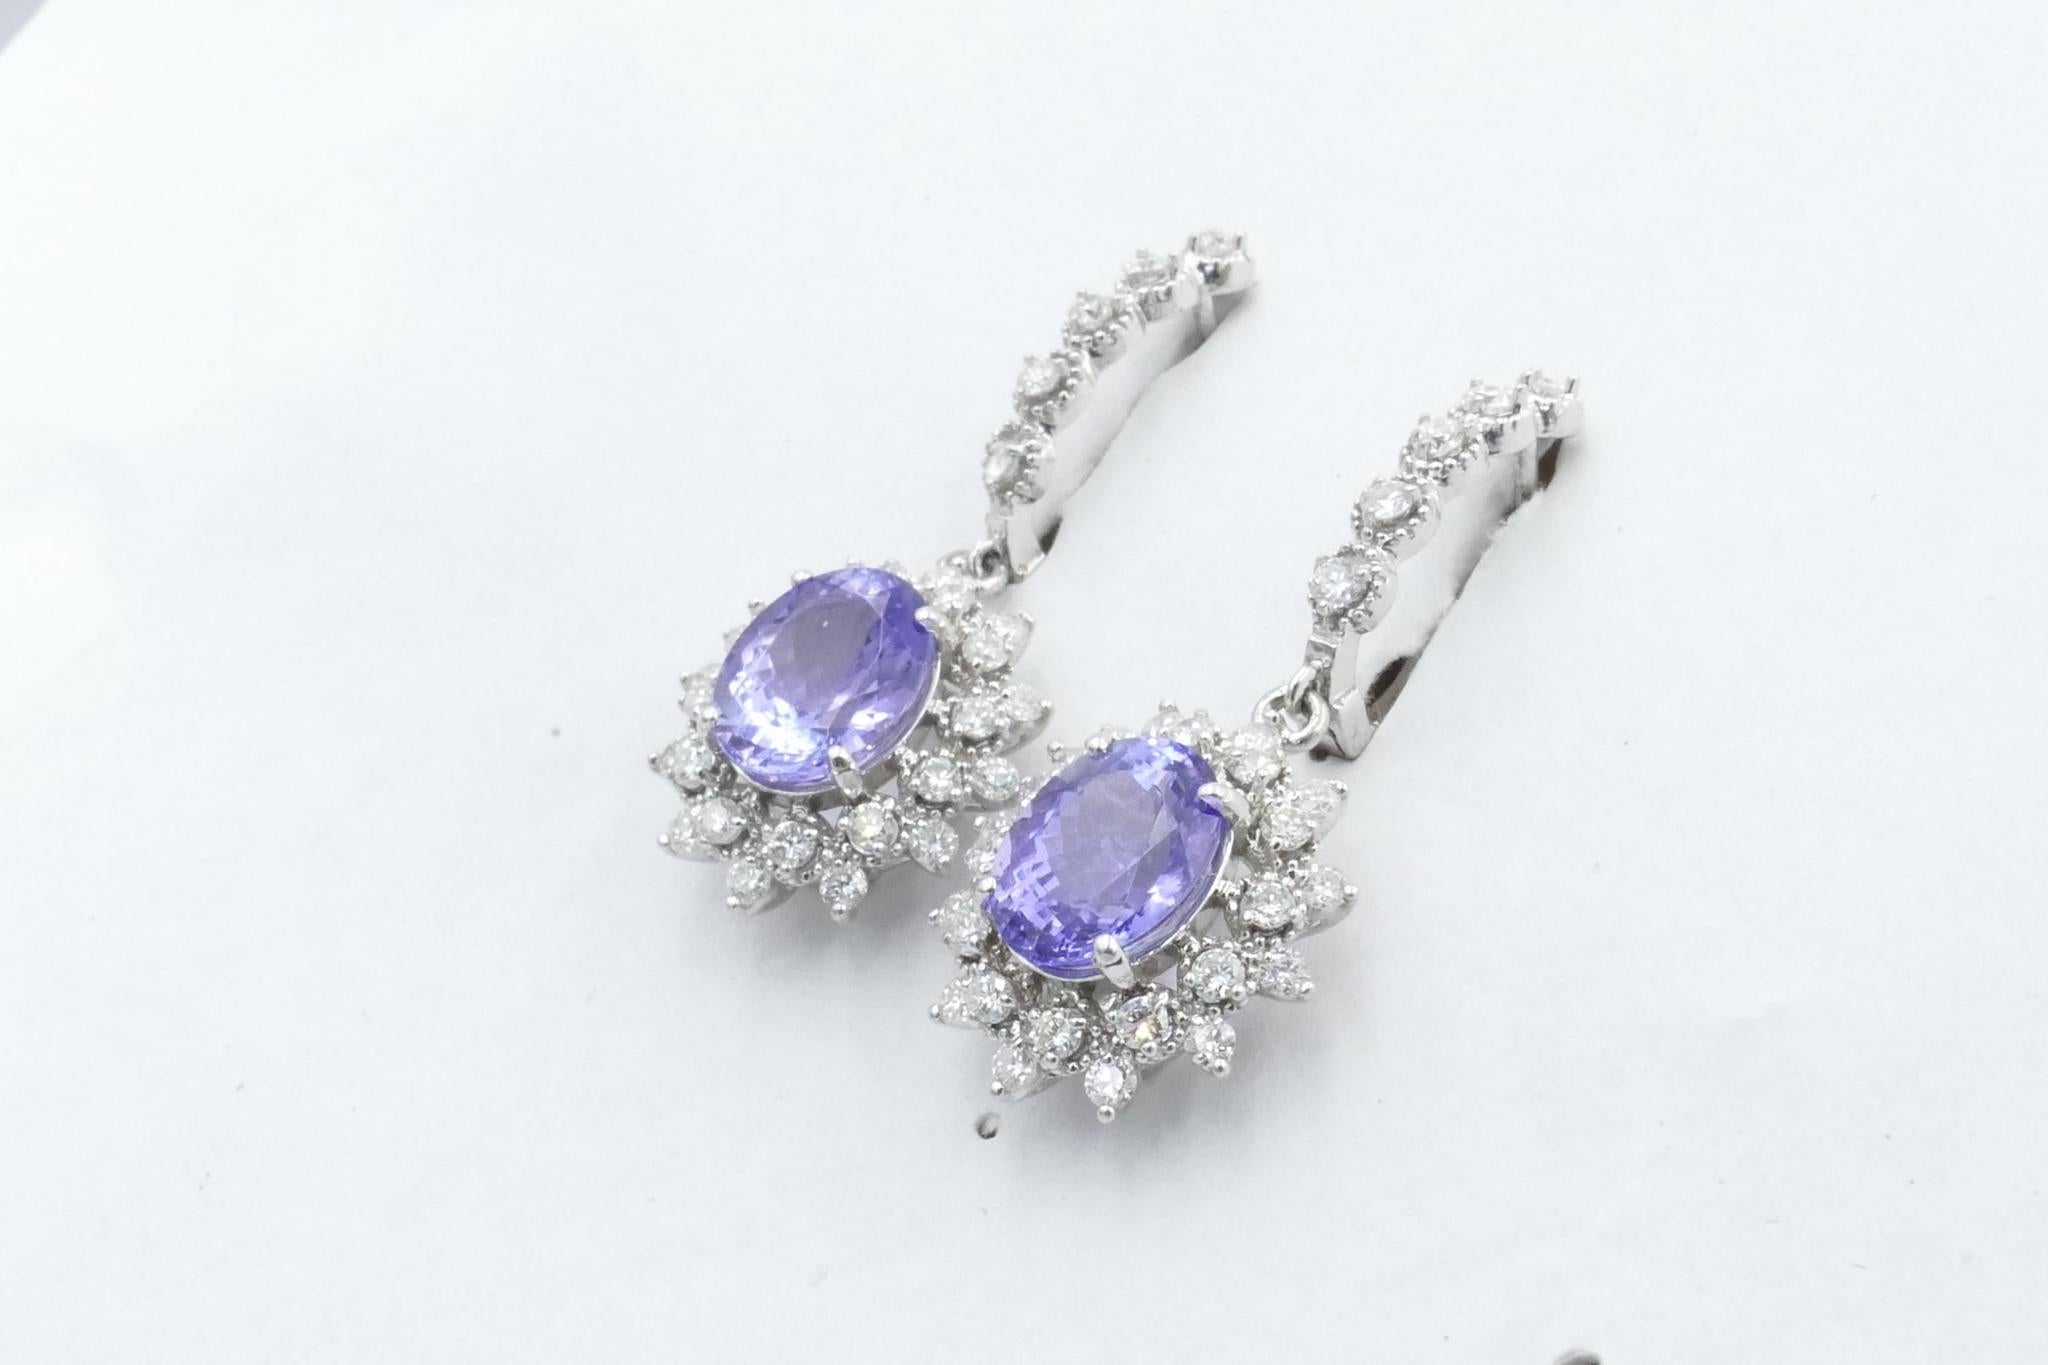 The Earrings have 2 Oval Cut tanzanites 4 Claw Set in the centre with 48 Round Brilliant Cut Diamonds totalling nearly 1 carat set along 2 rows around the centre settings.
As well 10 Round Brilliant Cut Diamonds totalling 0.2 carats, claw set, are